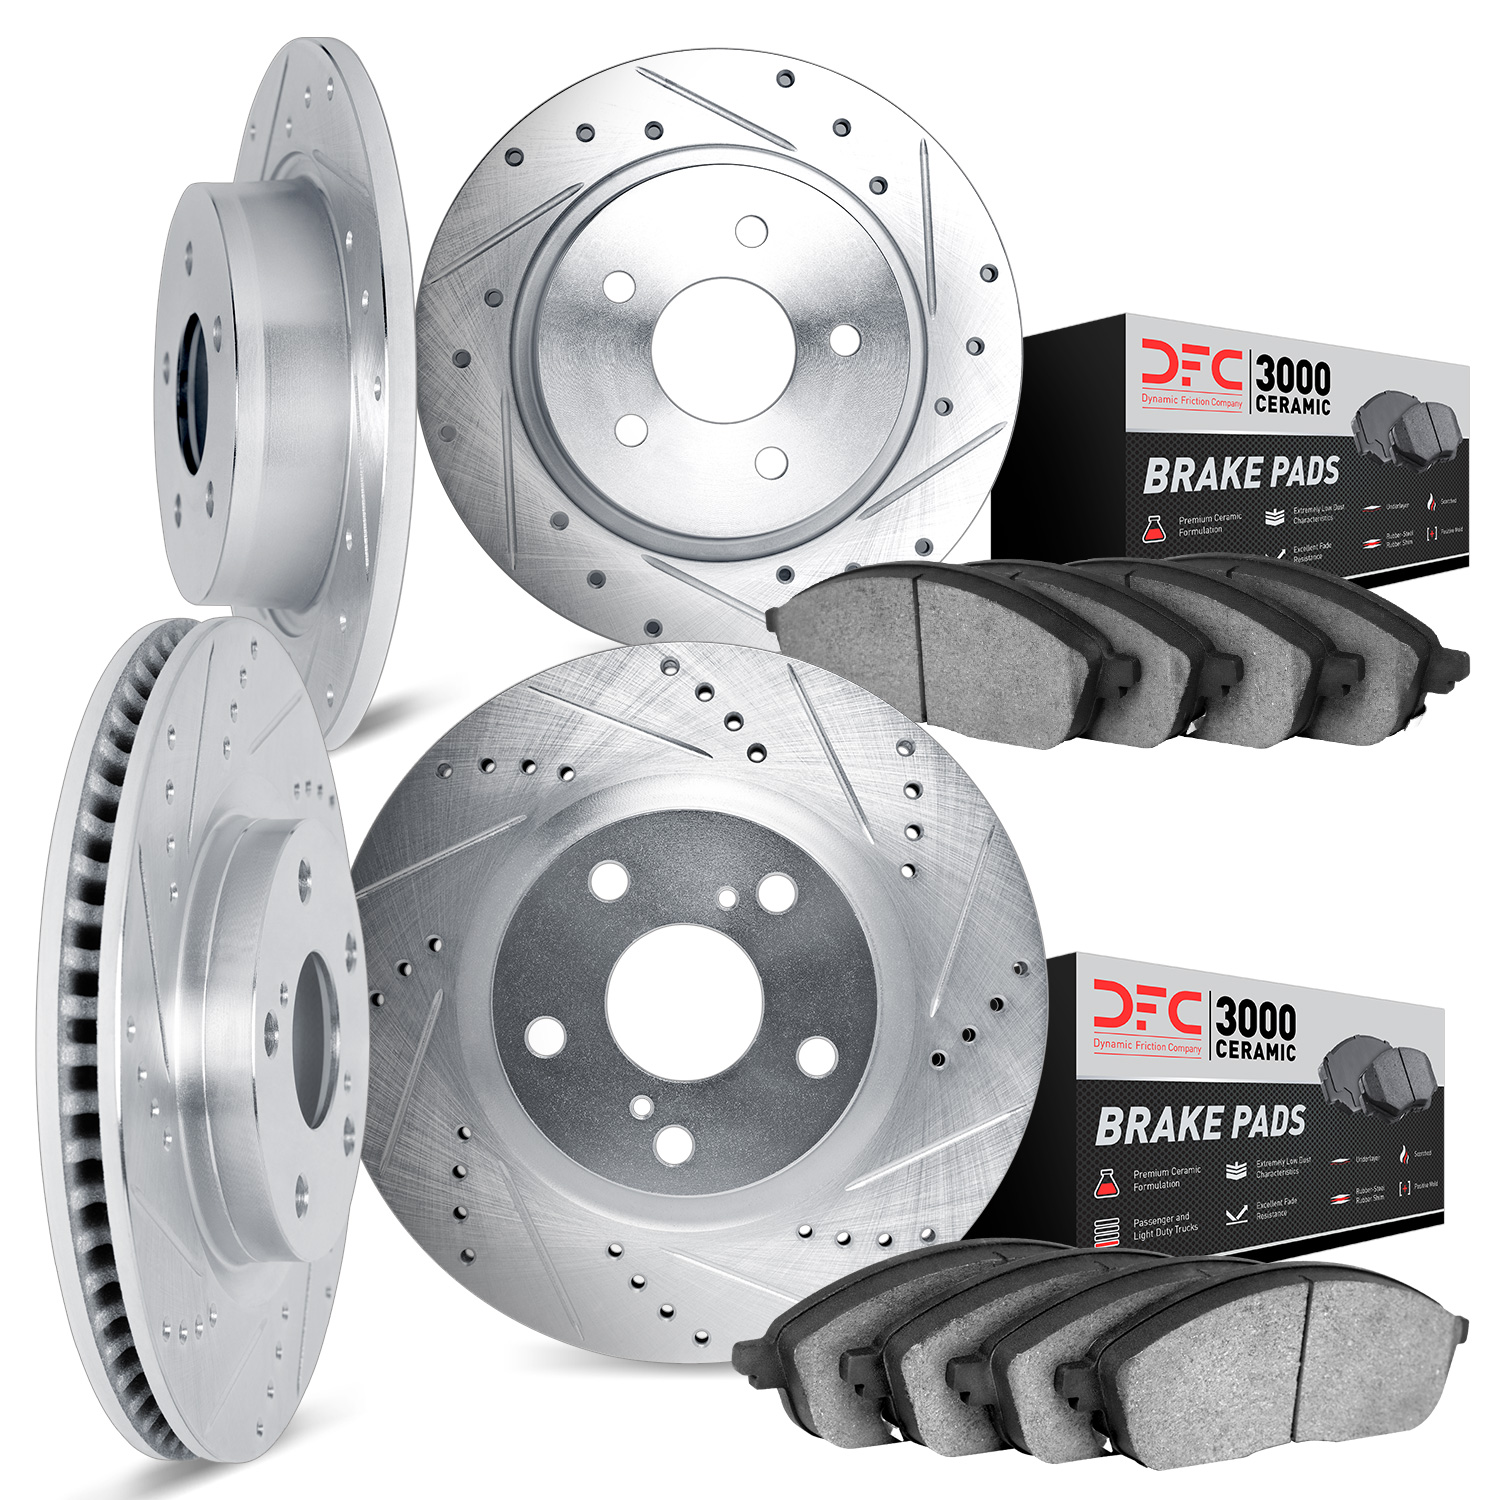 7304-54021 Drilled/Slotted Brake Rotor with 3000-Series Ceramic Brake Pads Kit [Silver], 1994-1998 Ford/Lincoln/Mercury/Mazda, P